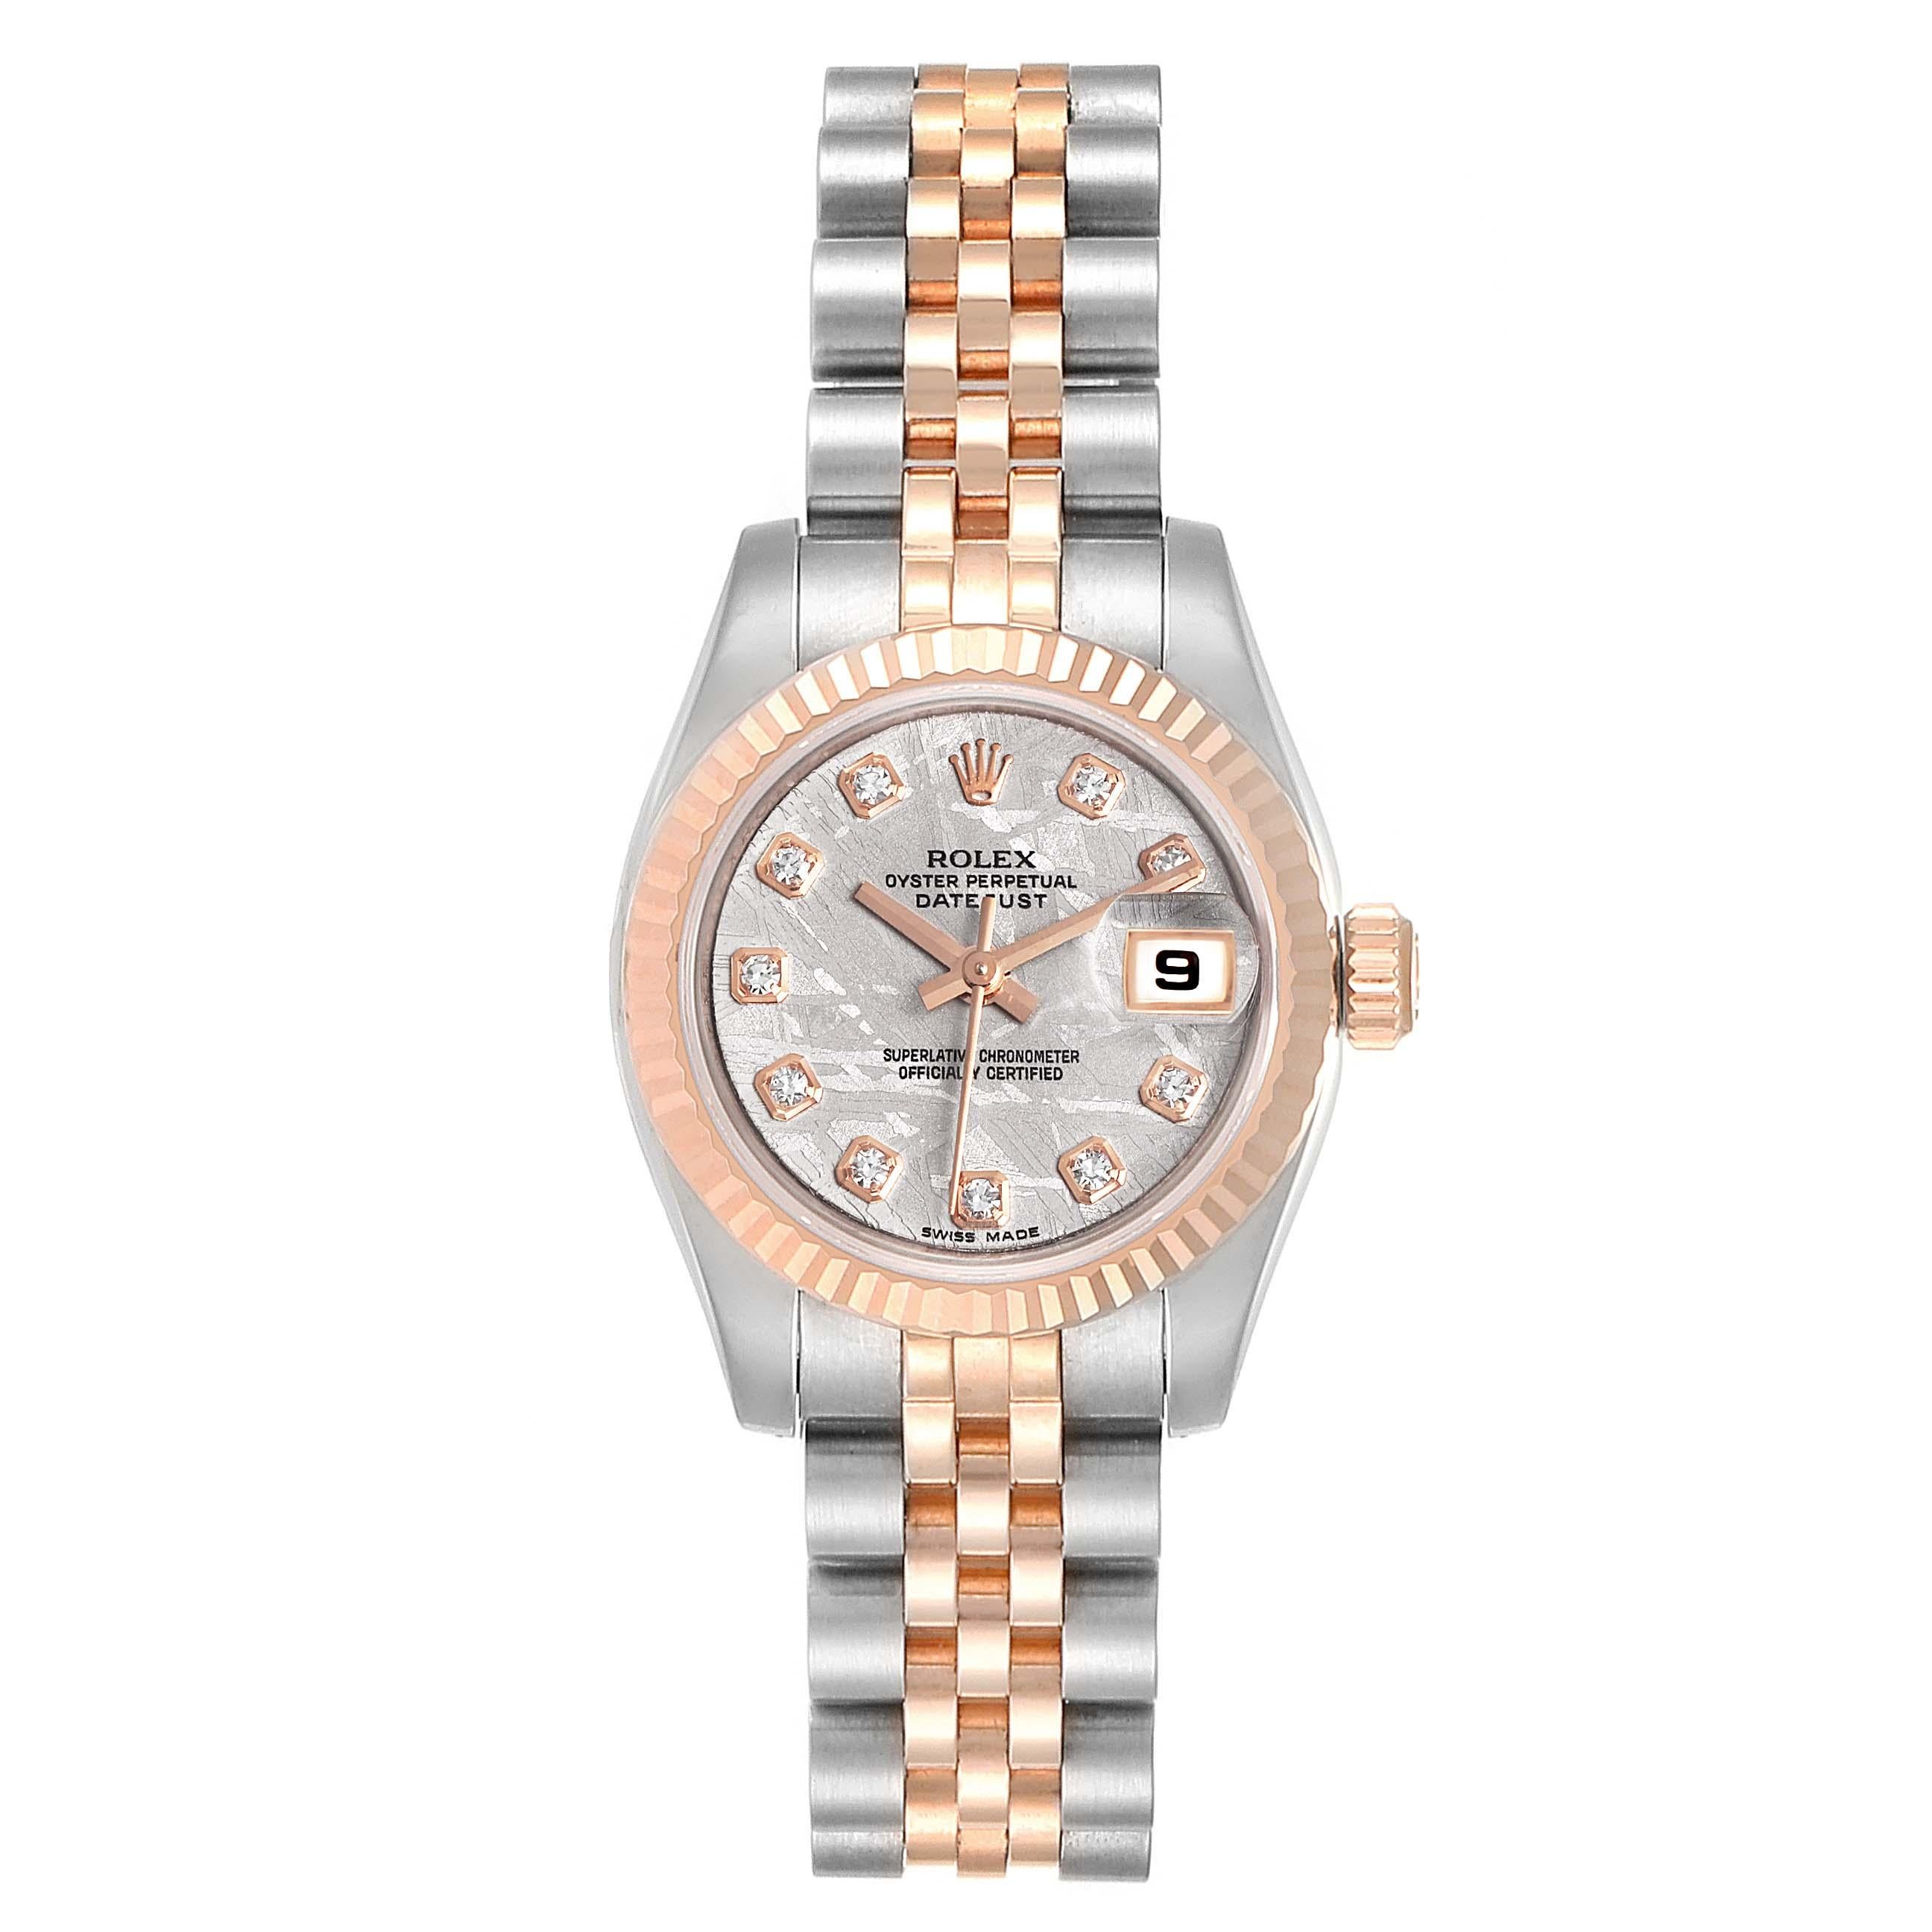 Rolex Datejust Steel EveRose Gold Meteorite Diamond Ladies Watch 179171. Officially certified chronometer self-winding movement. Stainless steel oyster case 26.0 mm in diameter. Rolex logo on a 18K rose gold crown. 18k rose gold fluted bezel.